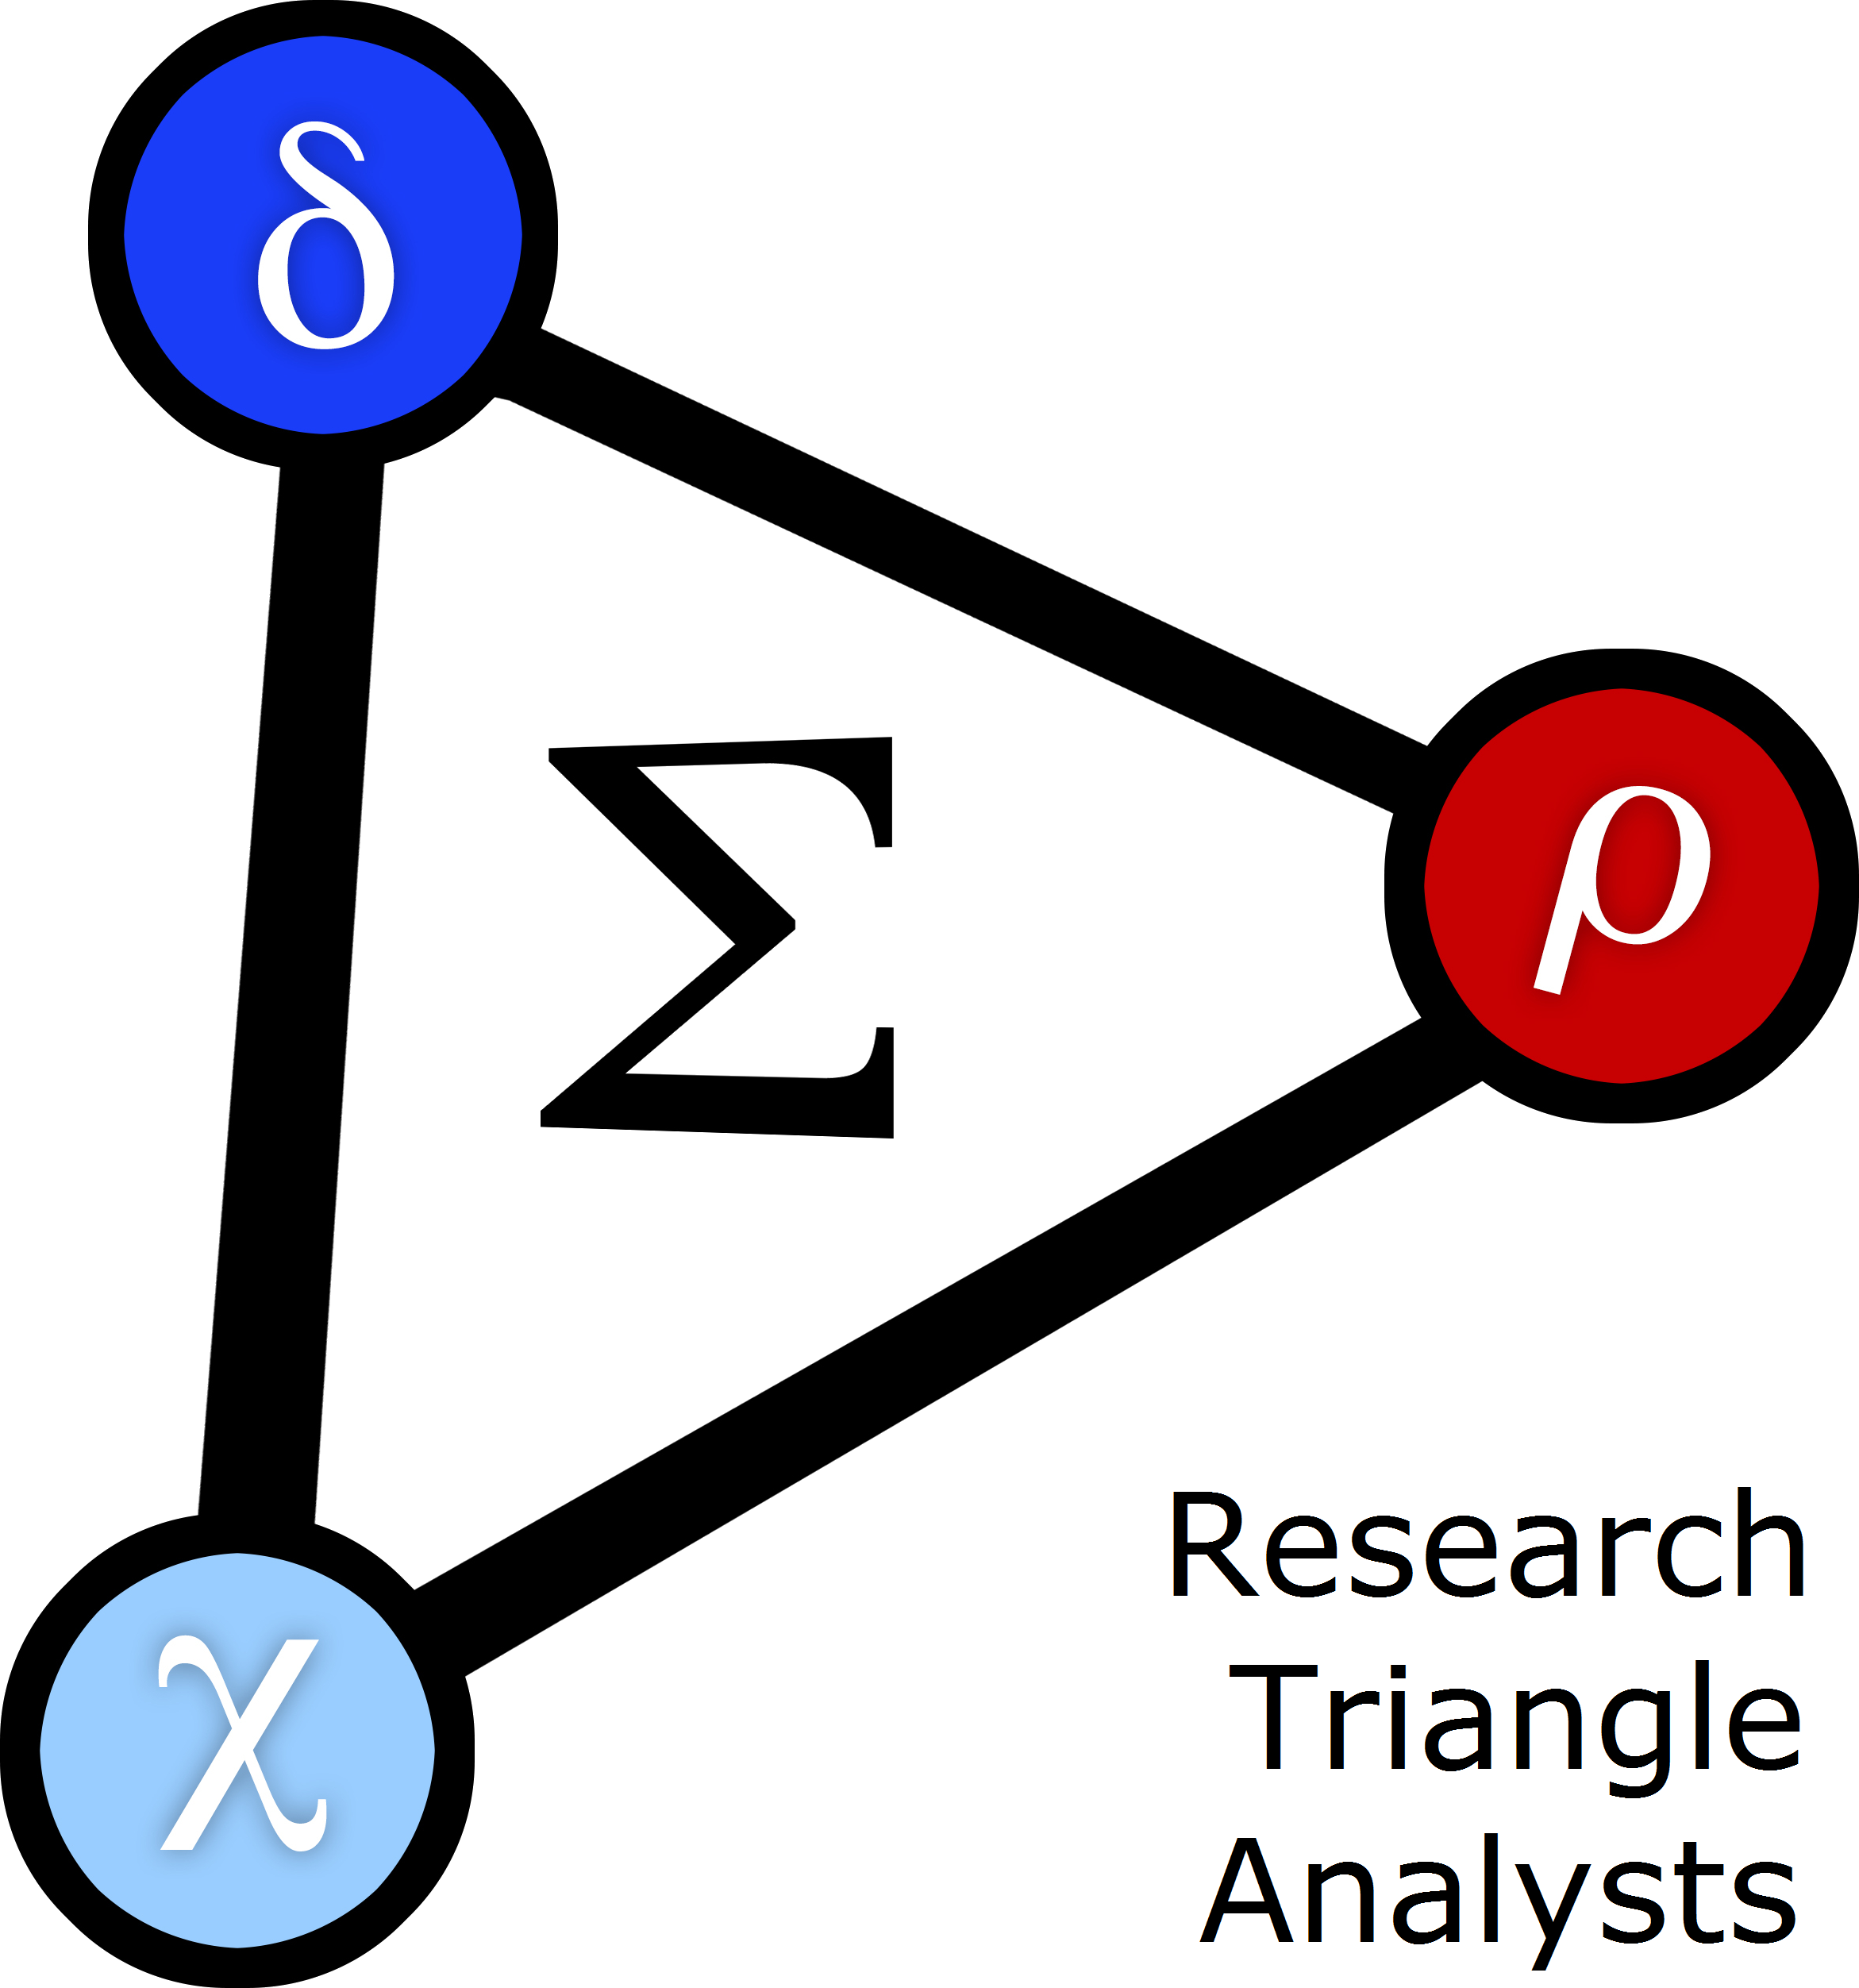 Research Triangle Analysts